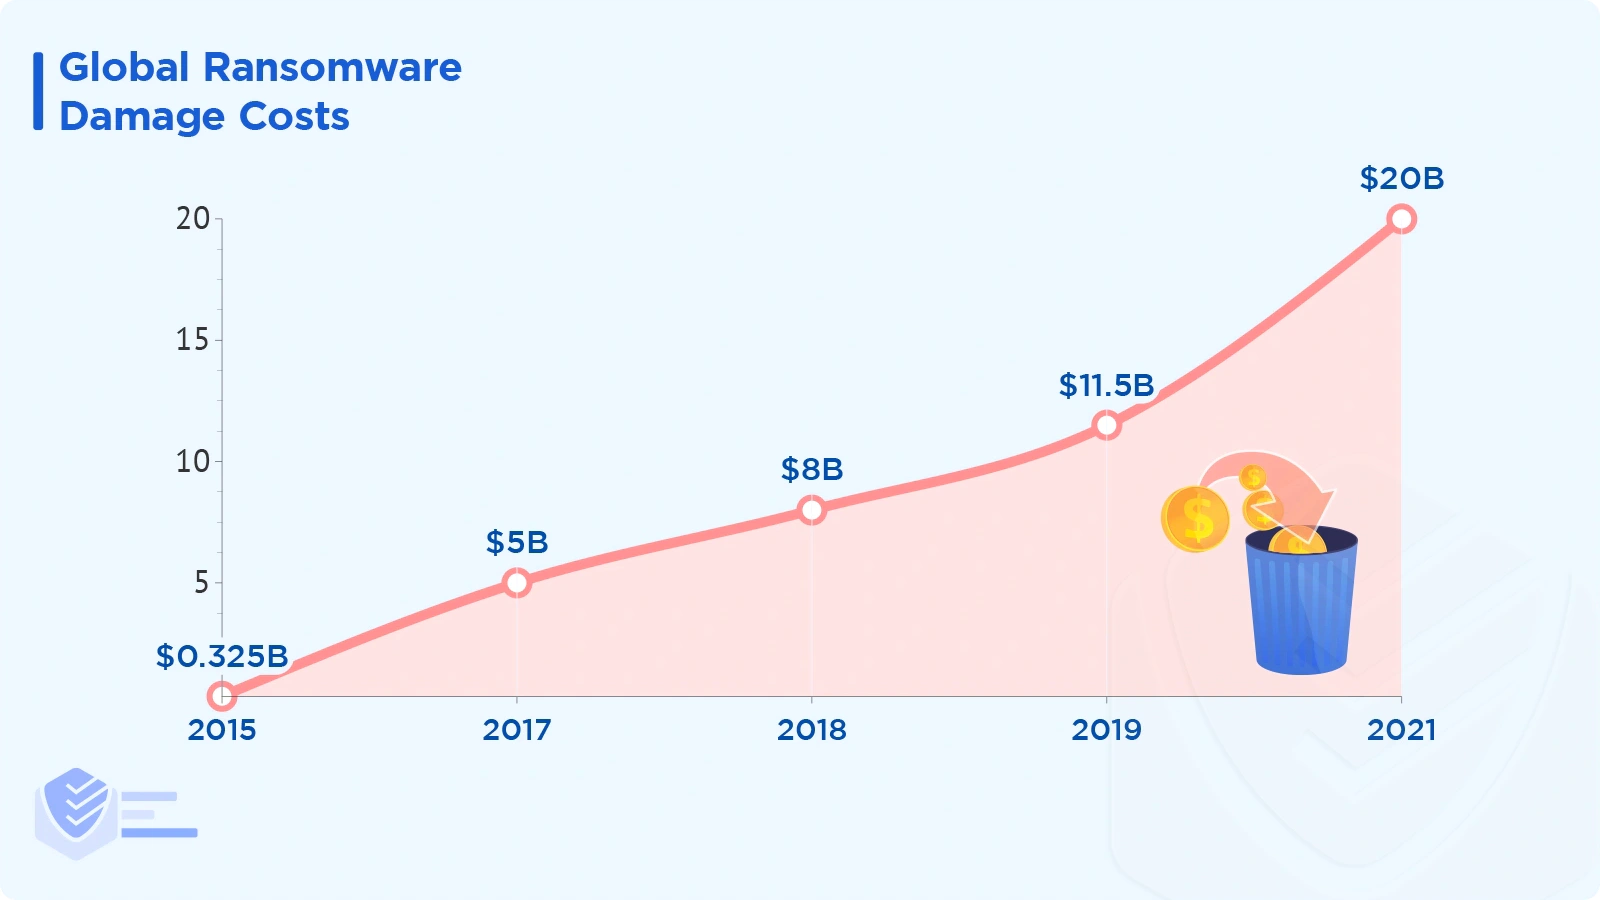 Global ransomware damage cost